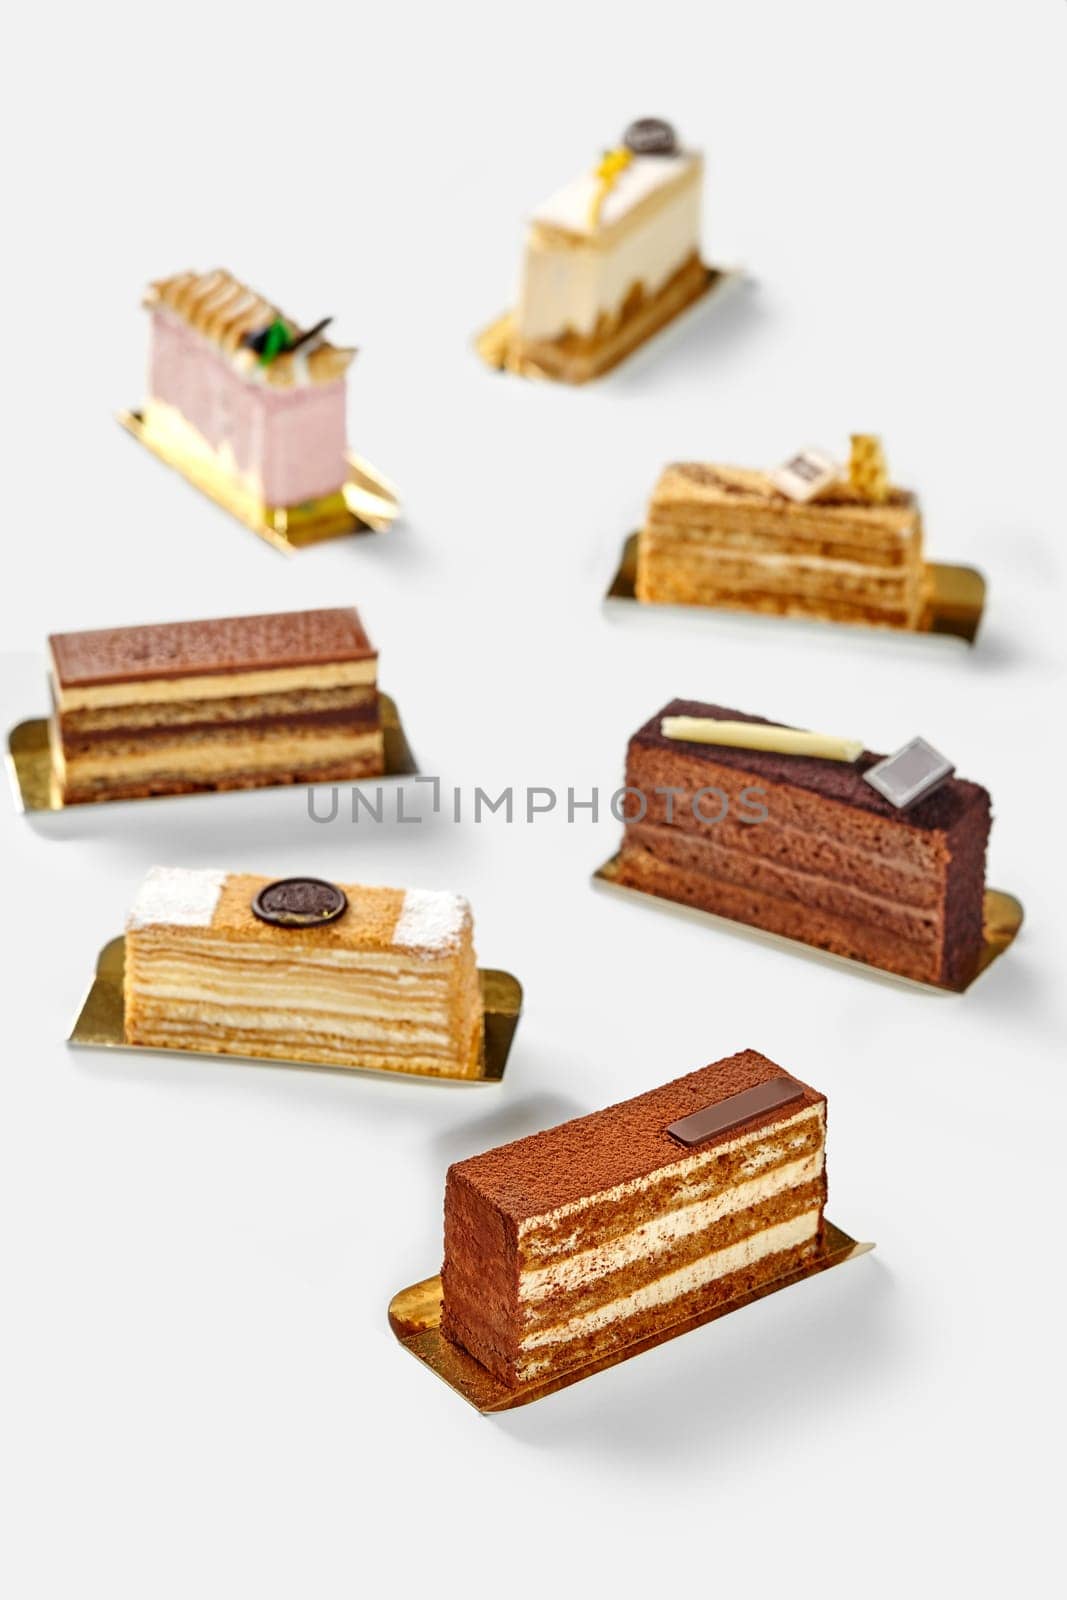 Slices of variety of exquisite cakes on white background by nazarovsergey